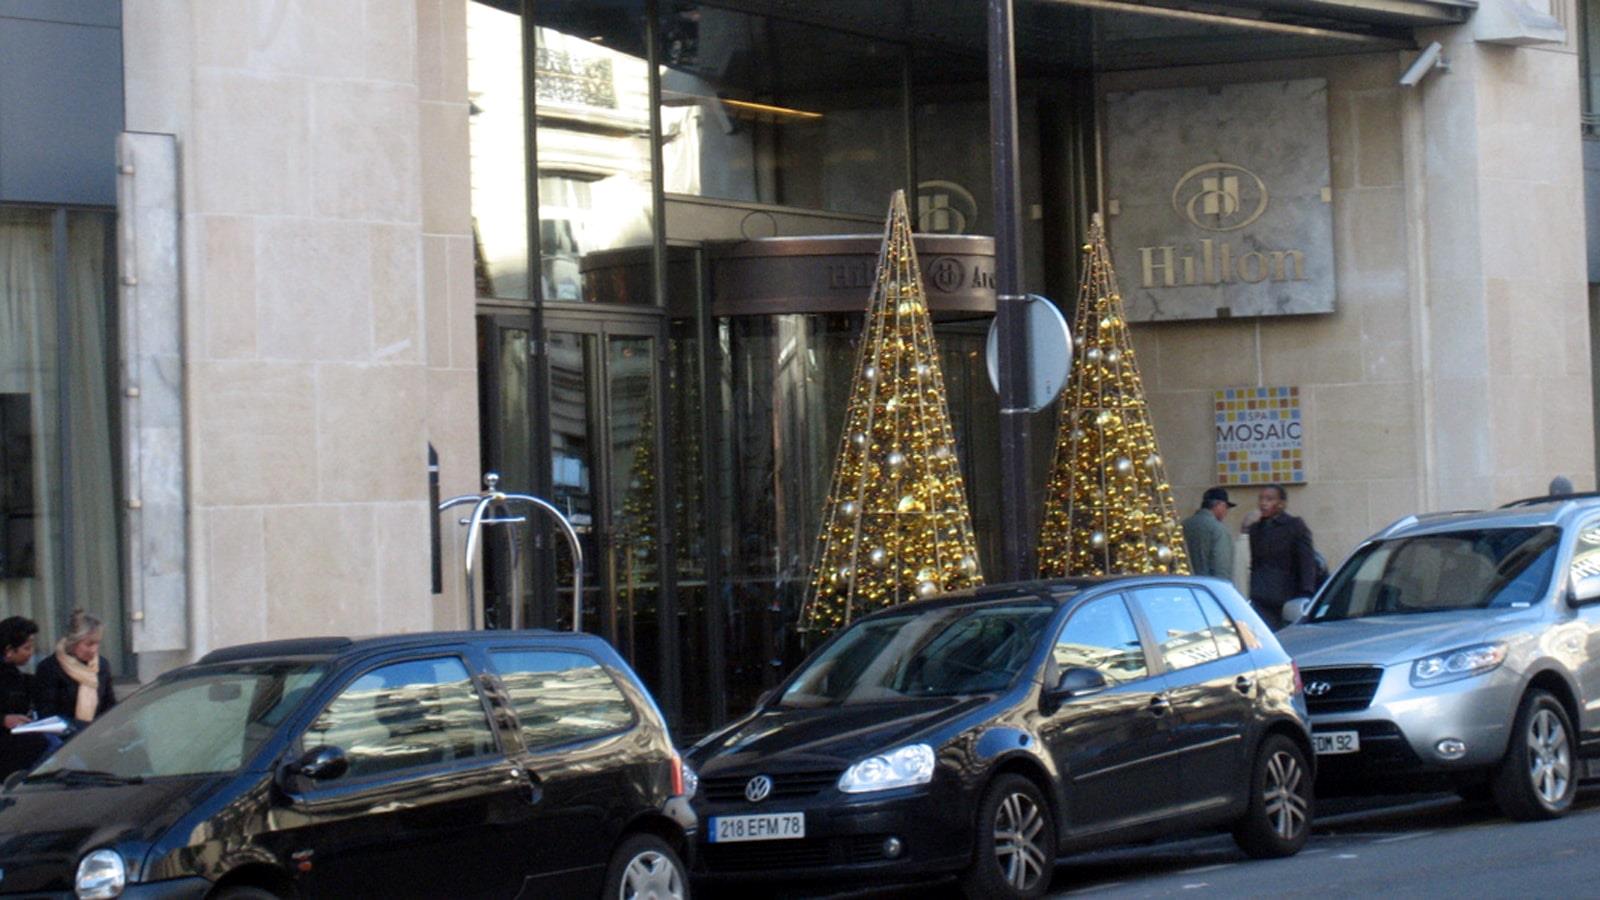 Two Christmas trees with golden decoration at Hilton Hotel entrance